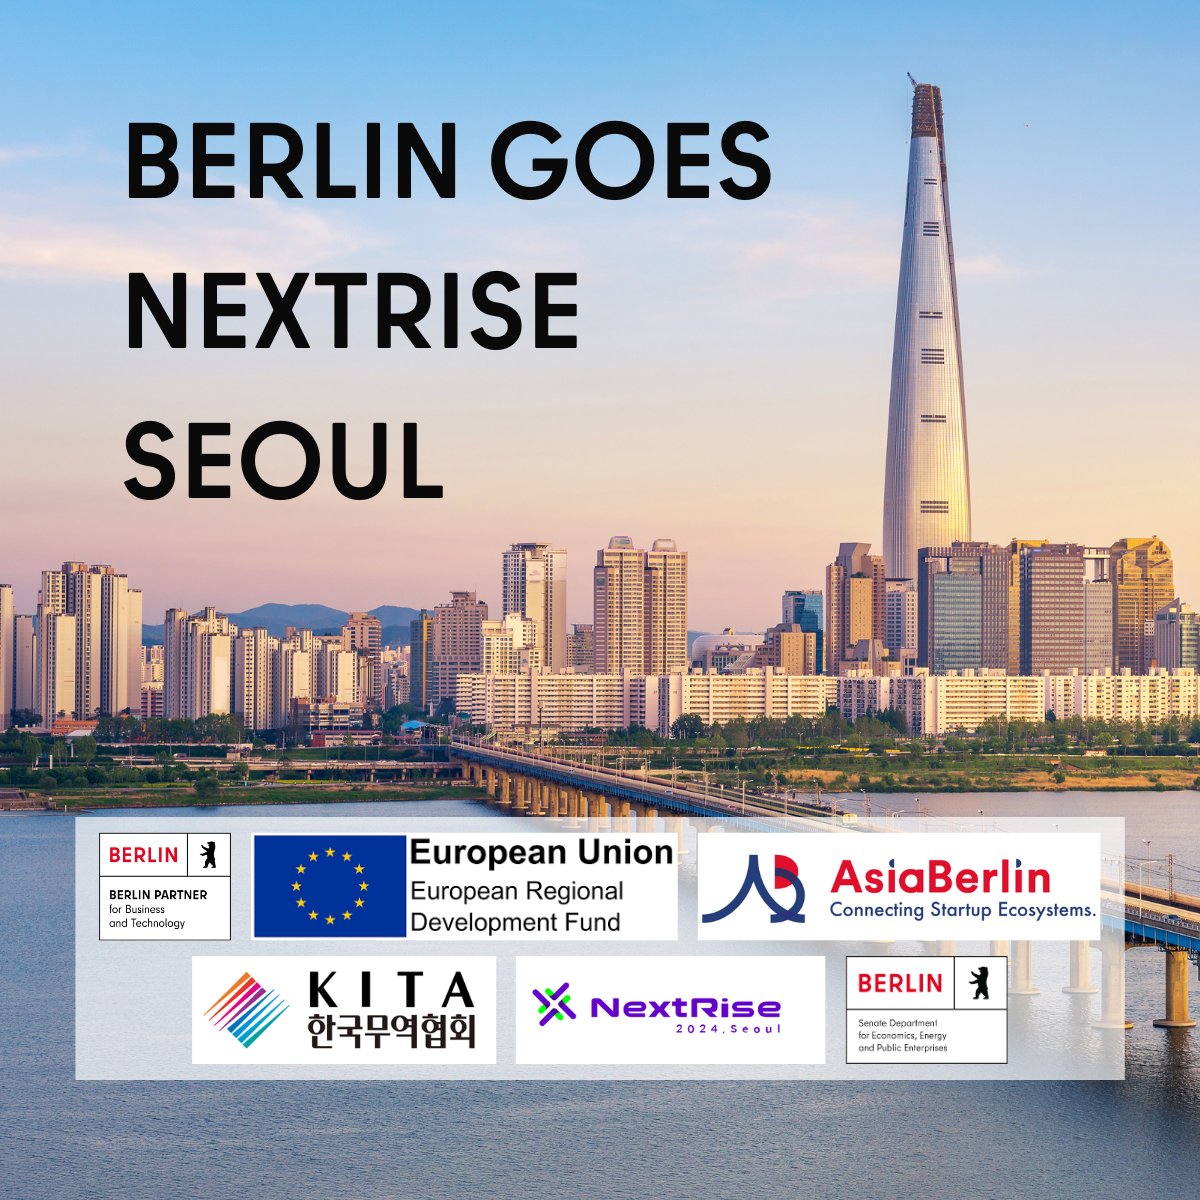 Last call to apply! Travel with @BerlinPartner and @Berlin_Asia from June 12-14 to #Seoul! 🎟️Pitching at the NextRise 🌐Side-Events 💡Site Visits 🤝Networking Apply now 👉 forms.office.com/e/wEHiFGxxCy